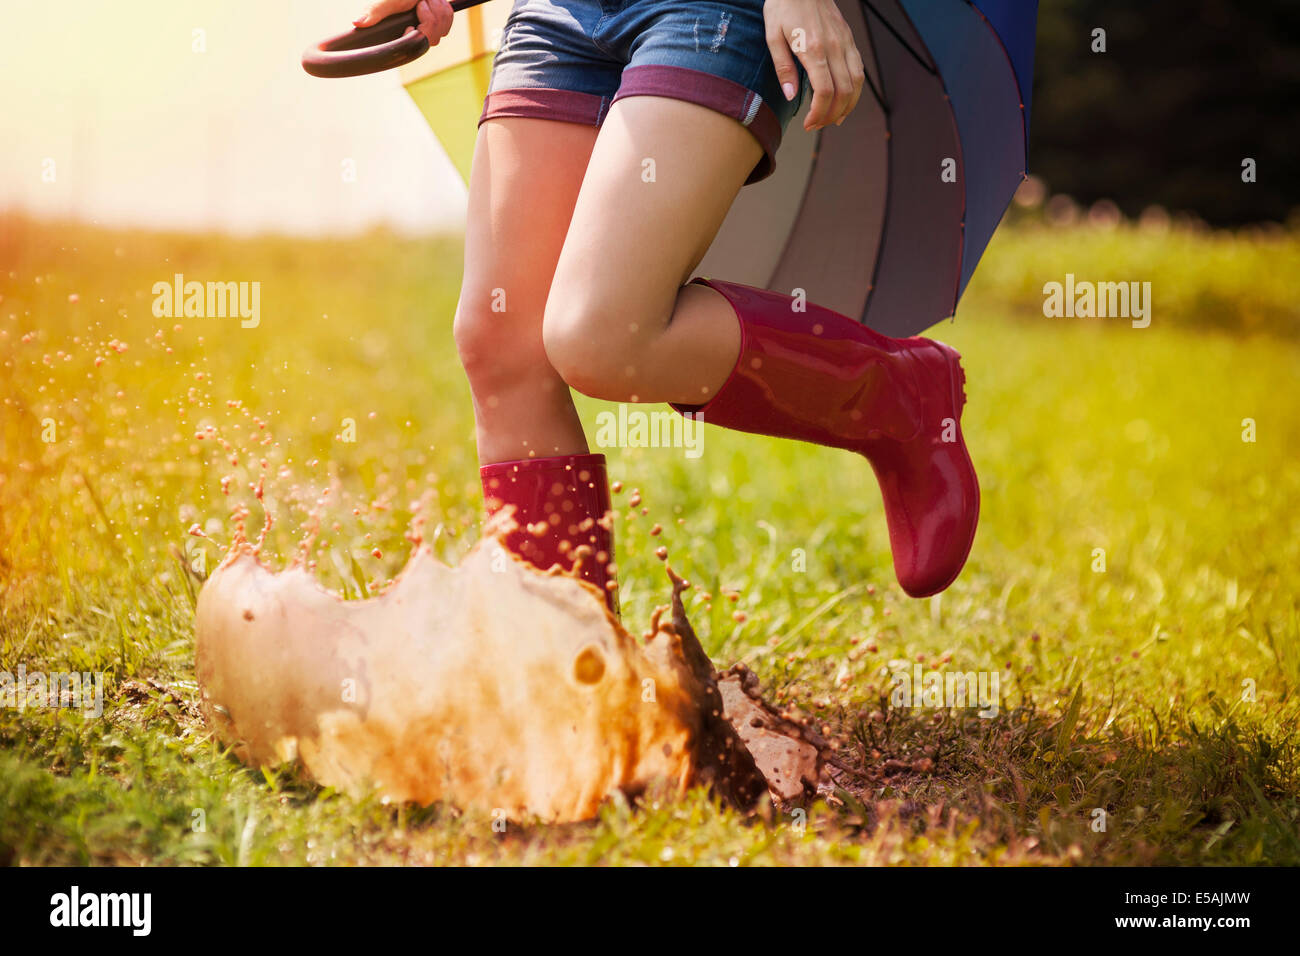 Jumping woman with umbrella and rubber boots, Debica, Poland Stock Photo